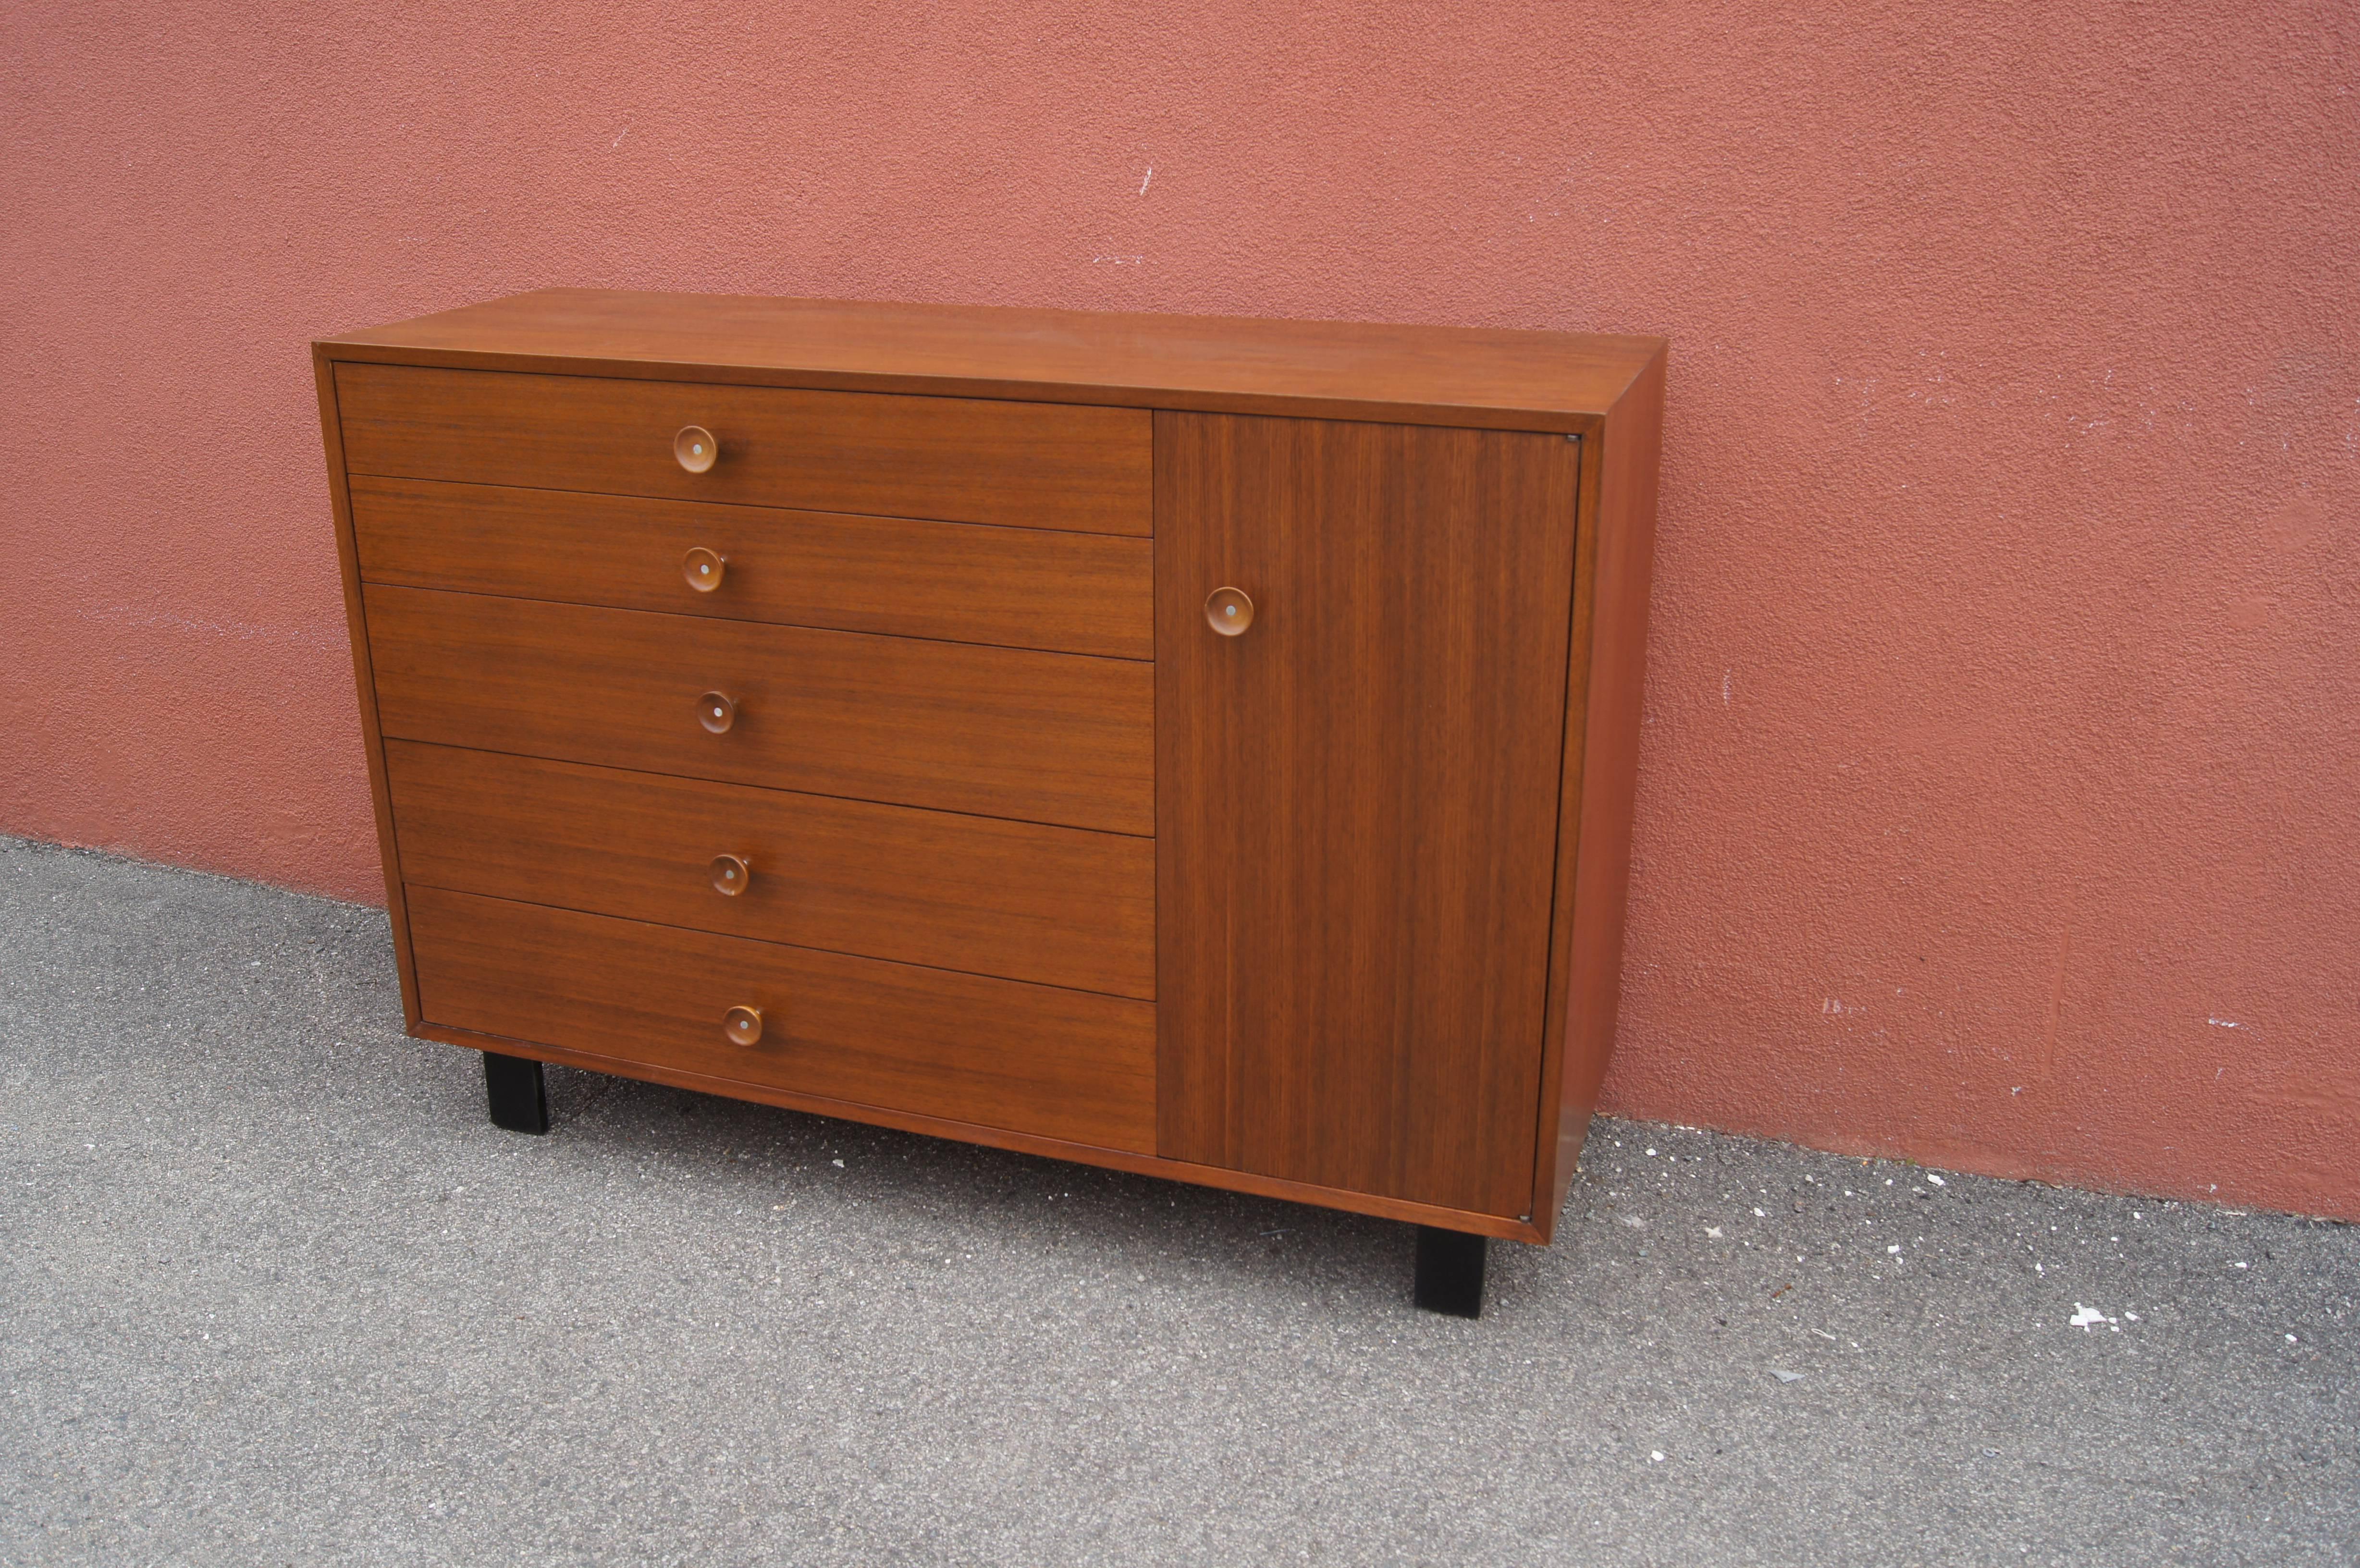 George Nelson designed this handsome dresser or cabinet, model 4935, for Herman Miller's Basic cabinet series. The tawny walnut case comprises five drawers on the left with dividers in the first and third drawers and a cabinet on the right with two